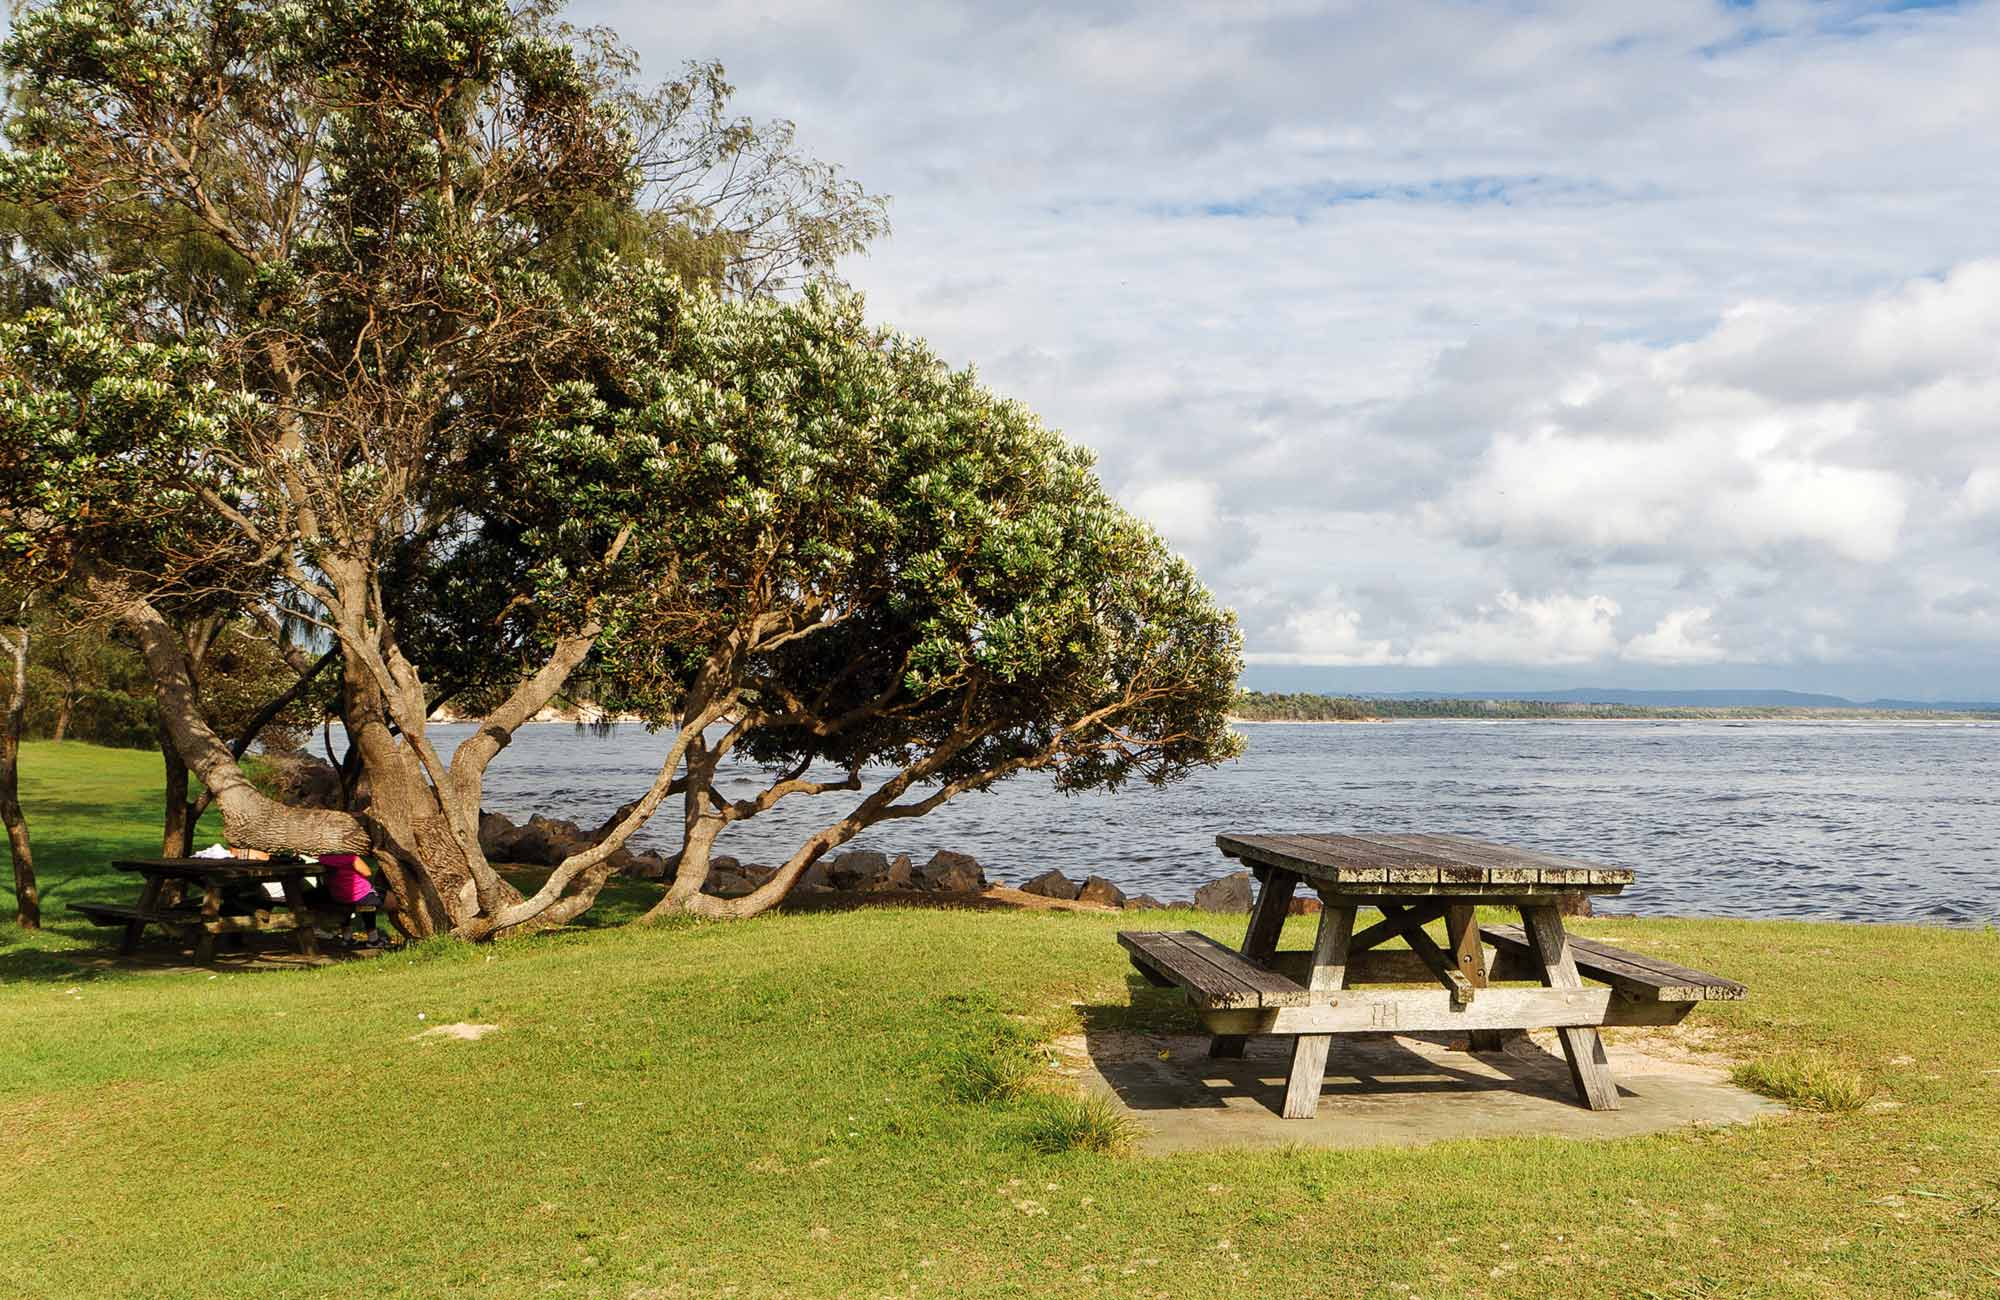 Picnic table overlooking the water. Photo: Rob Cleary